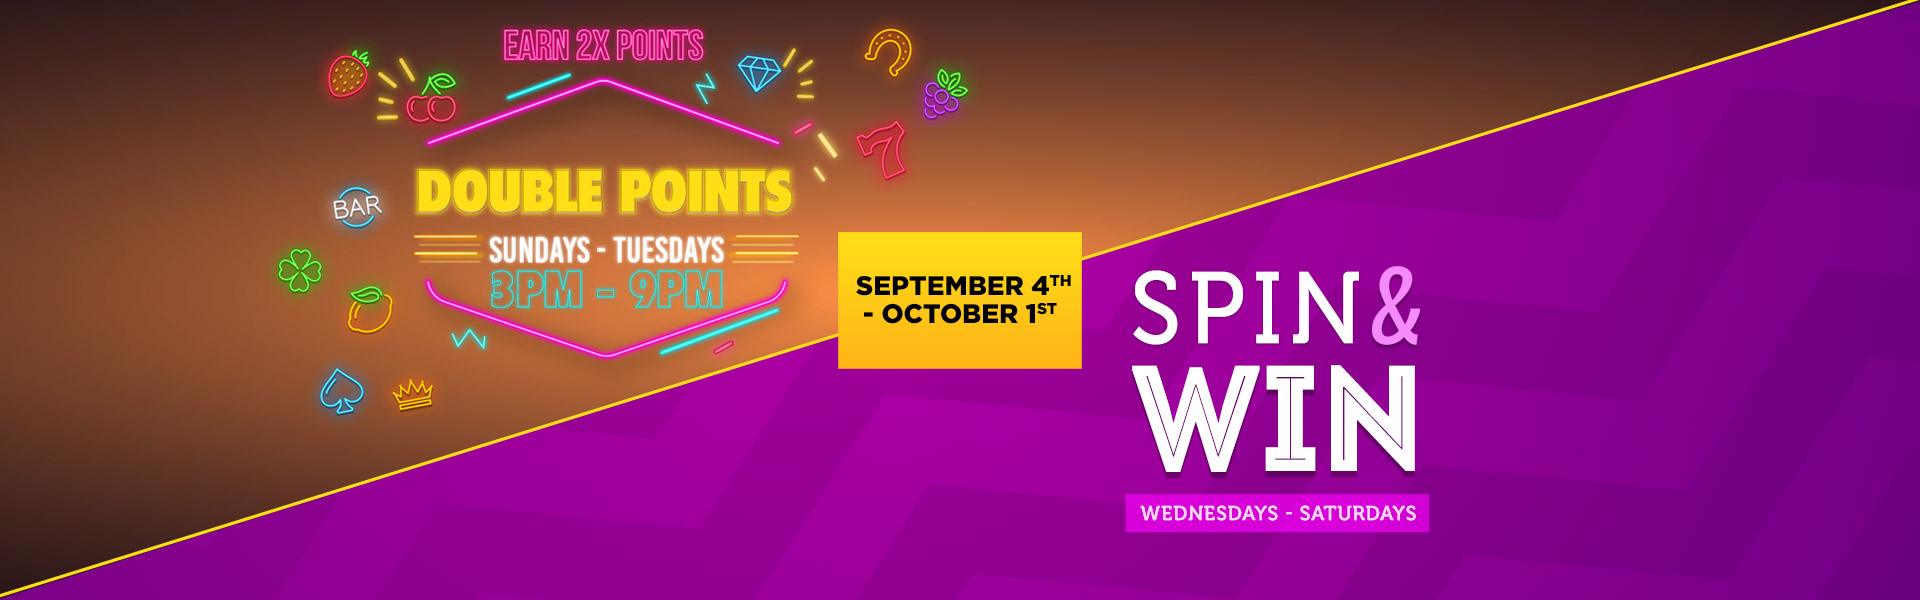 Double Points and Spin & Win